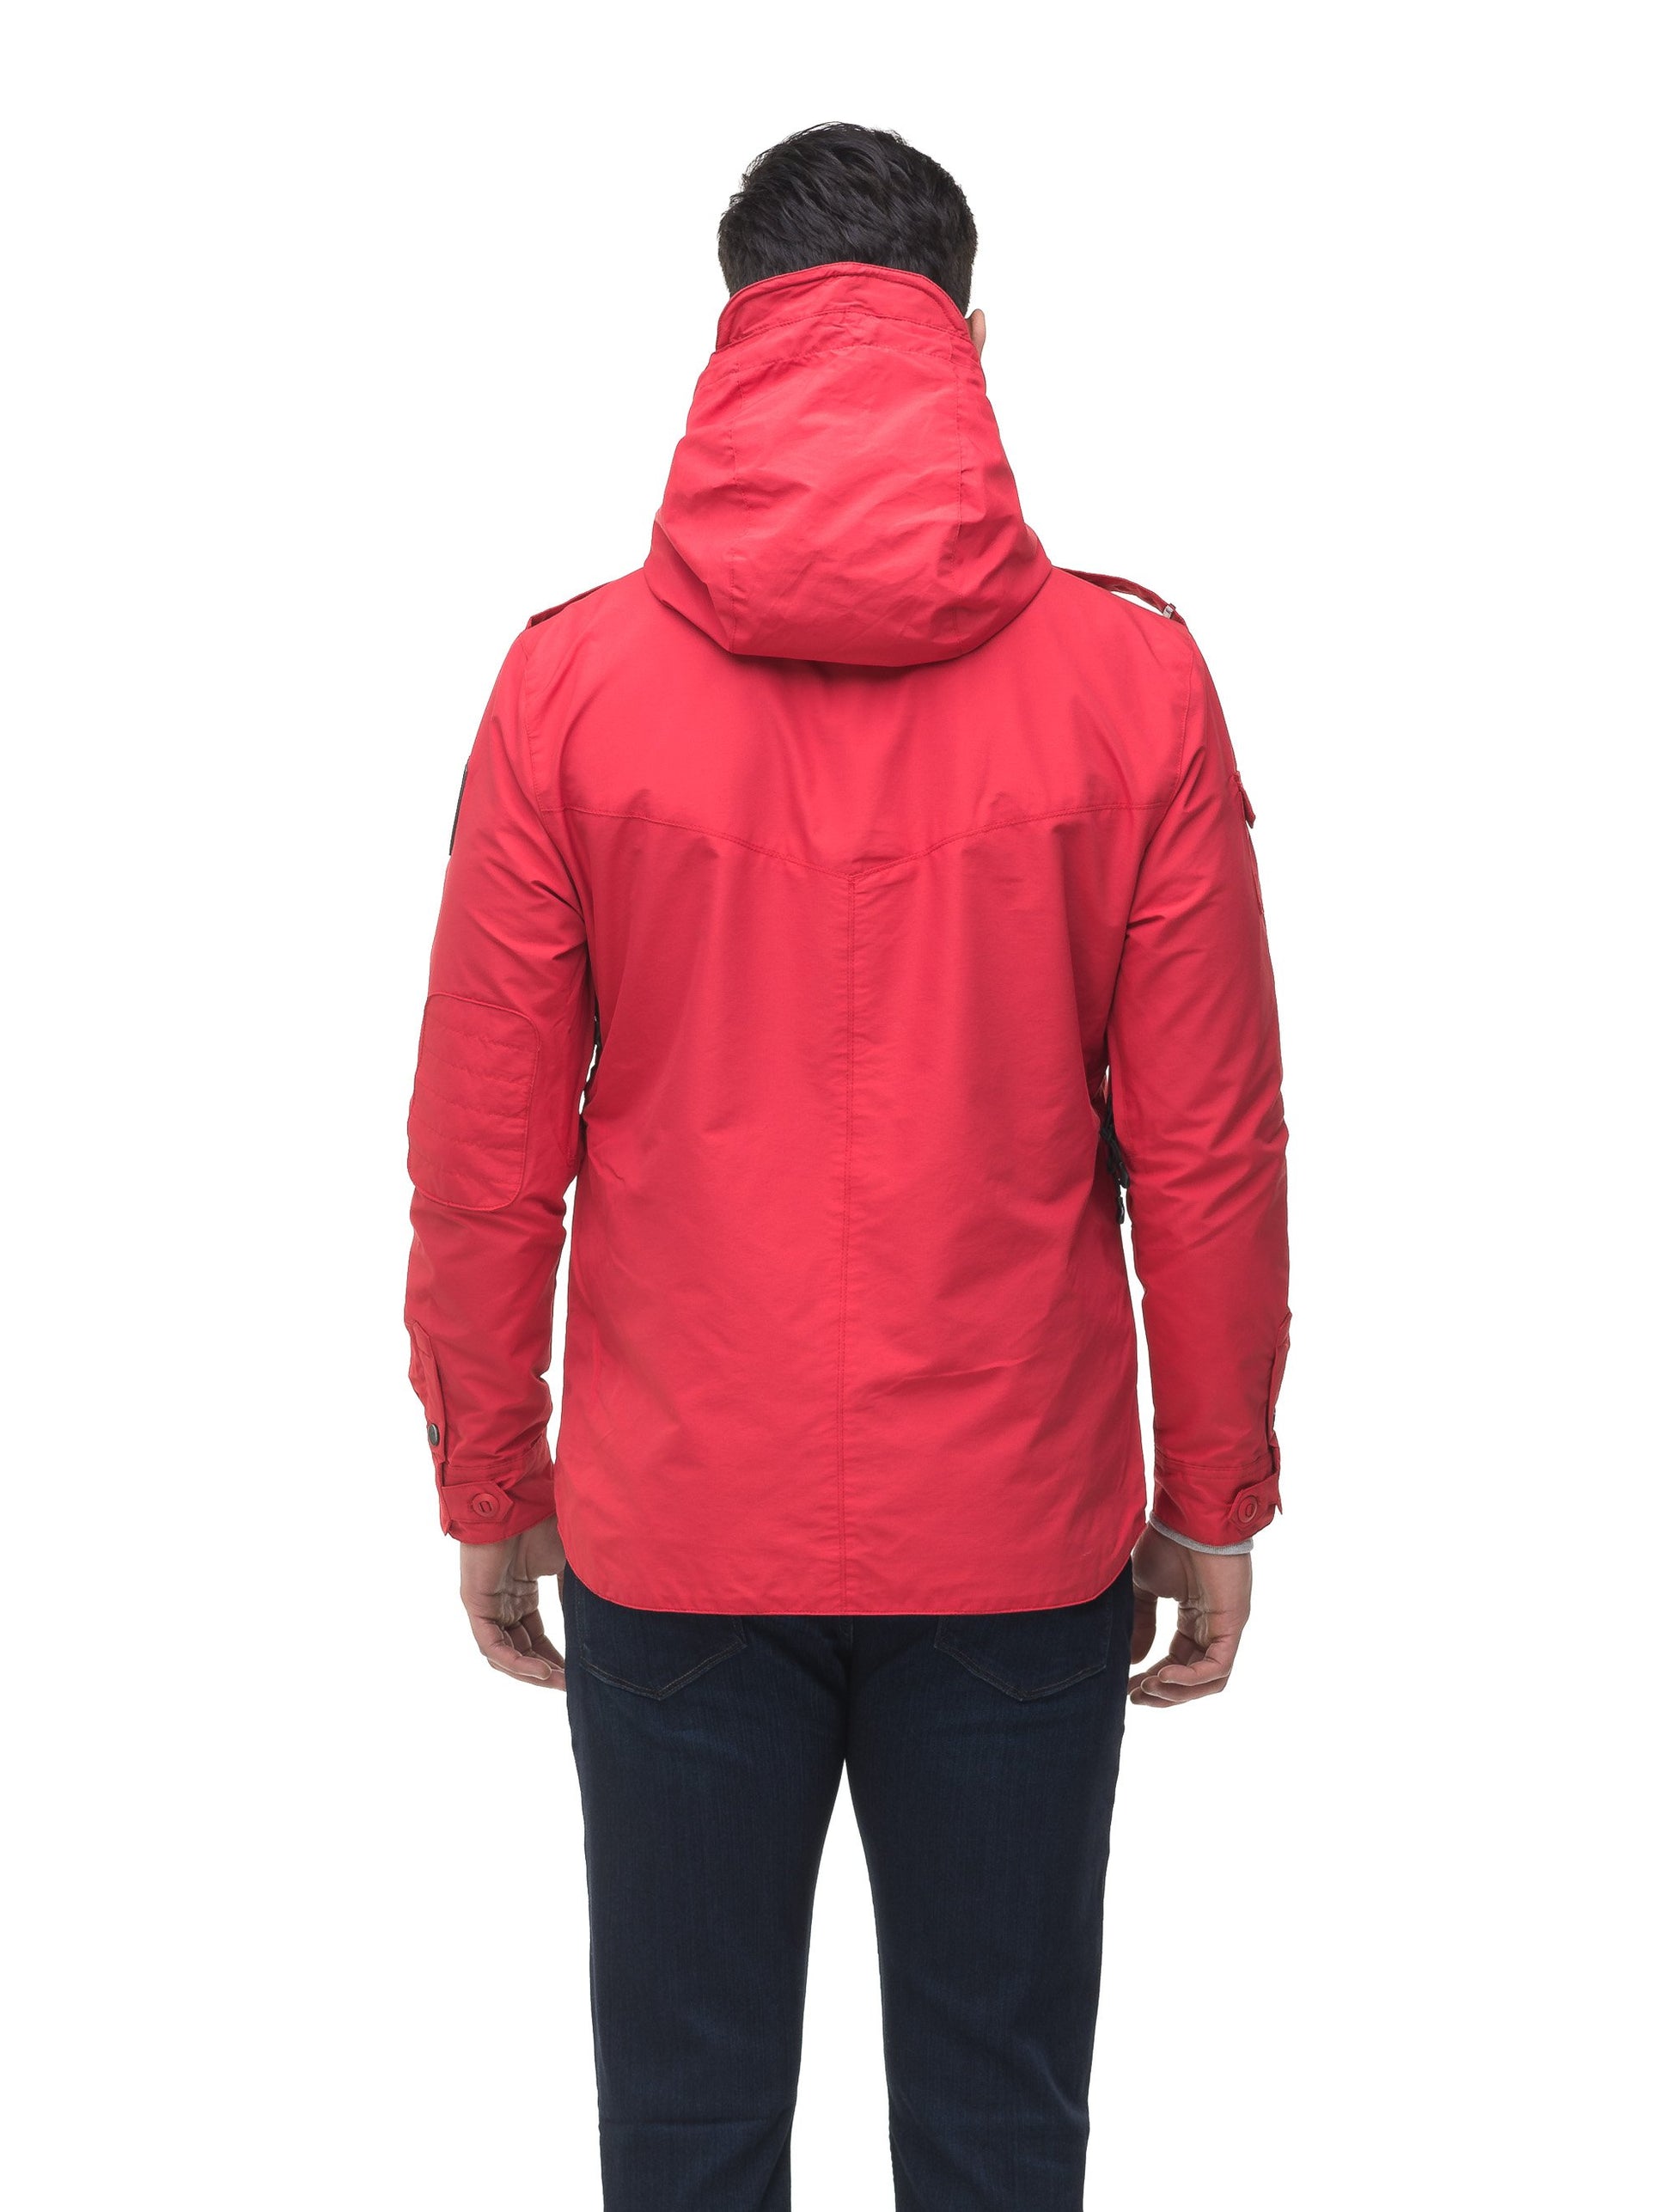 Men's hooded shirt jacket with patch chest pockets in Red